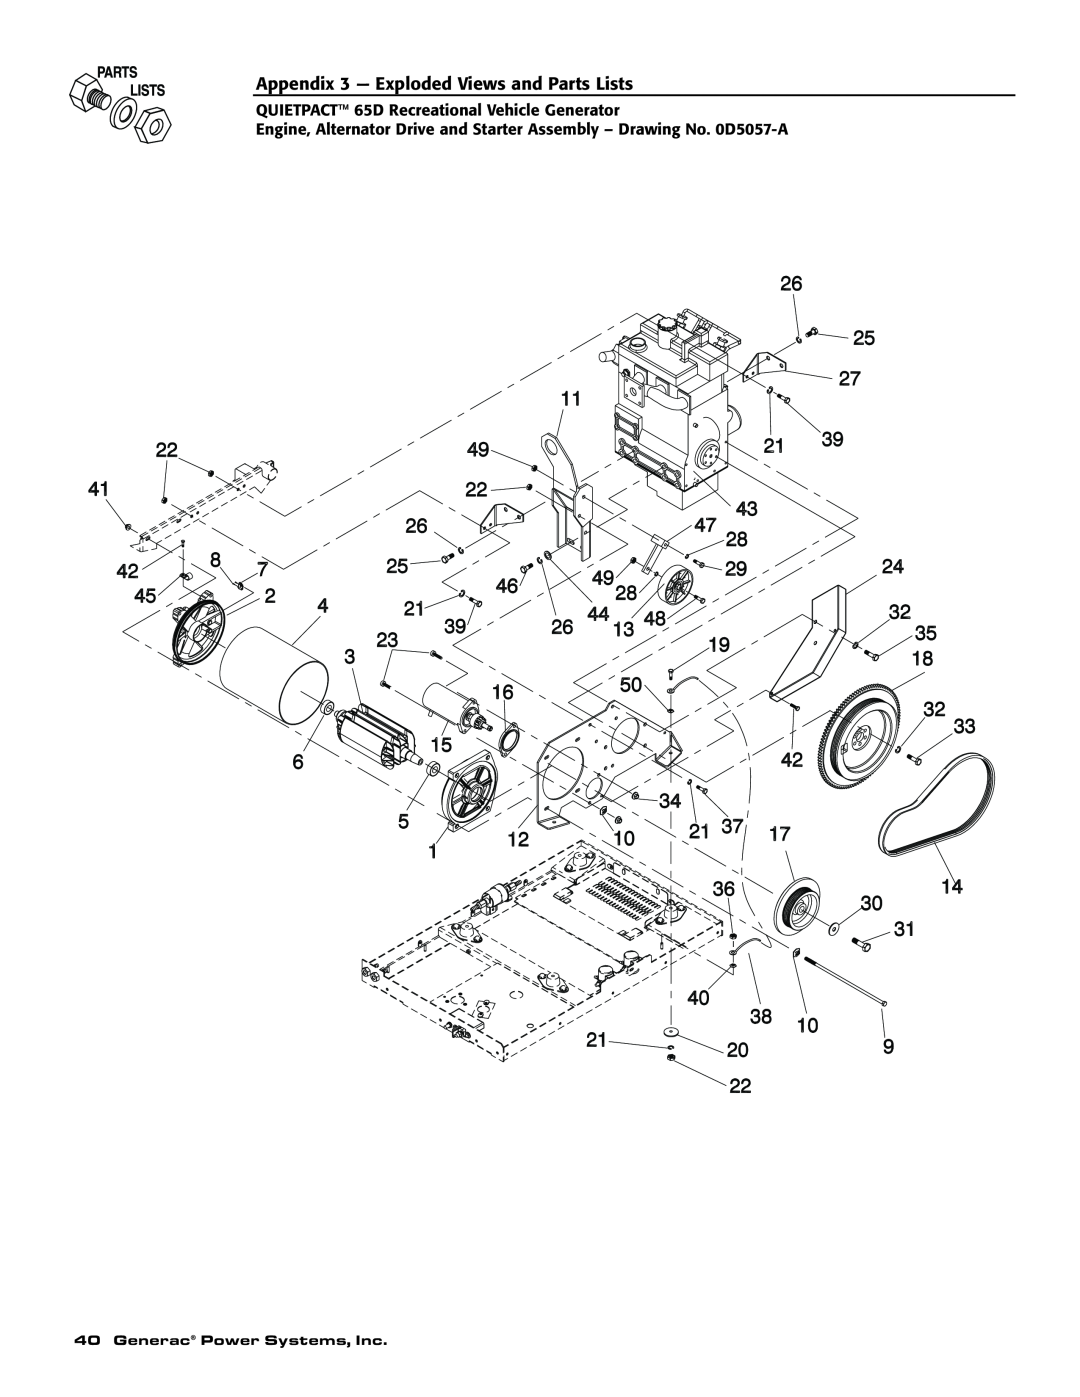 Generac 004614-1 owner manual Appendix 3 - Exploded Views and Parts Lists, QUIETPACT 65D Recreational Vehicle Generator 